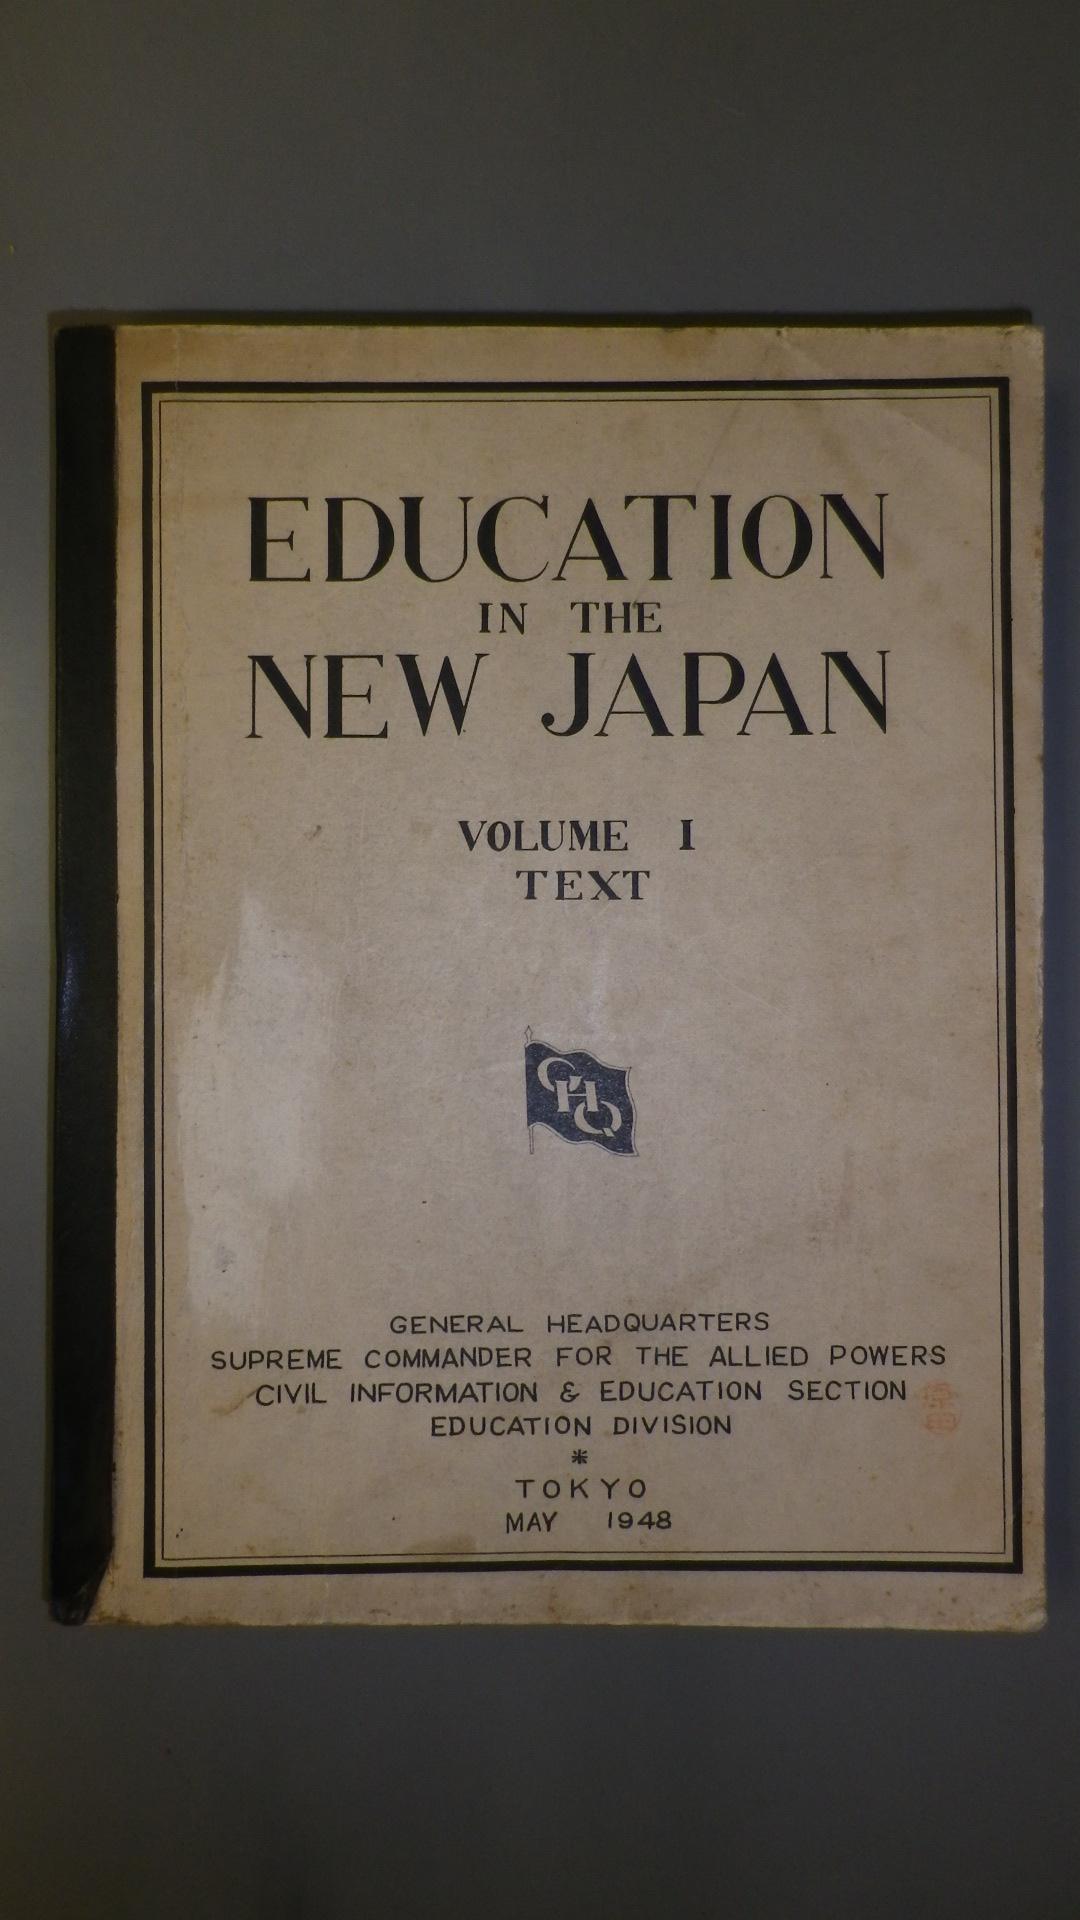 Education in the New Japan　VOLUME1 TEXT